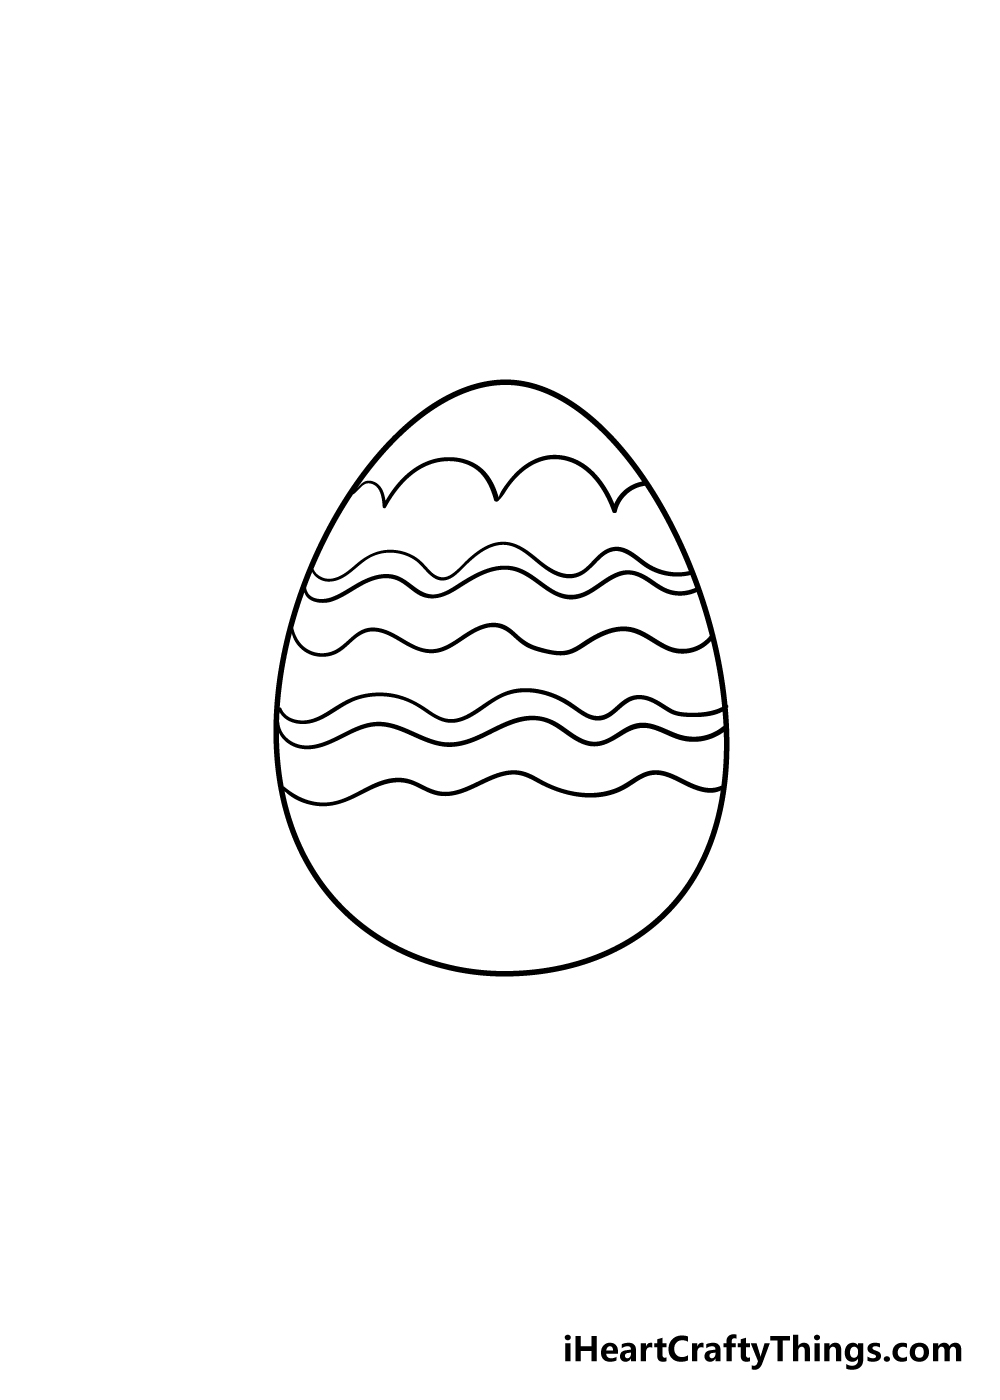 Easter egg drawing step 3